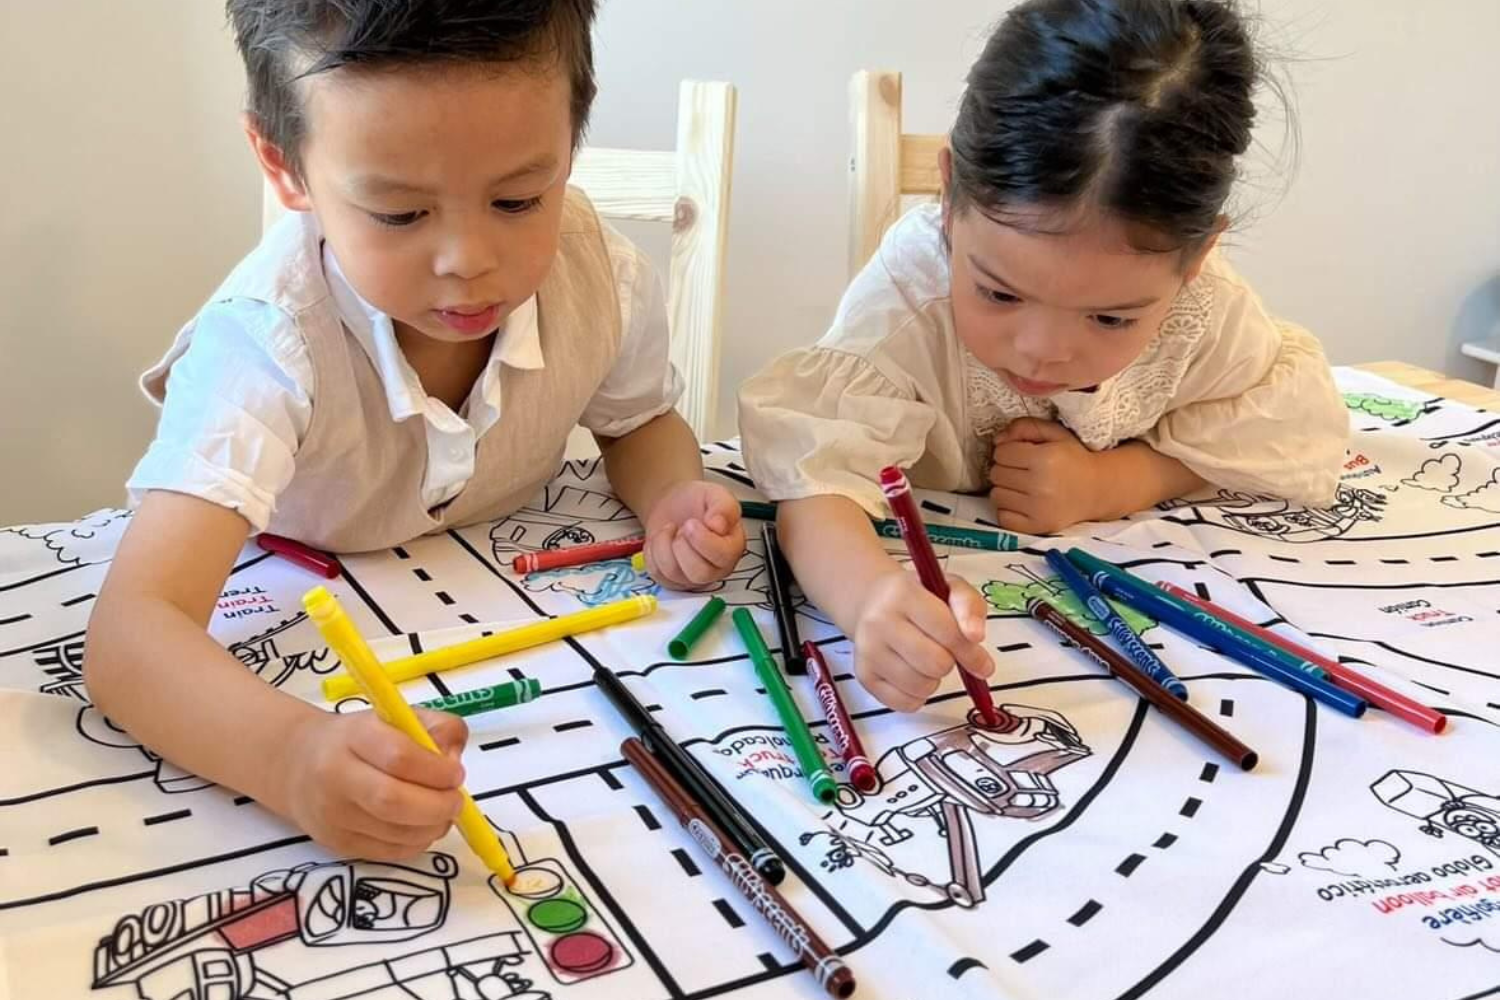 Fulfilling coloring: Unexpected benefits to discover, no matter your age